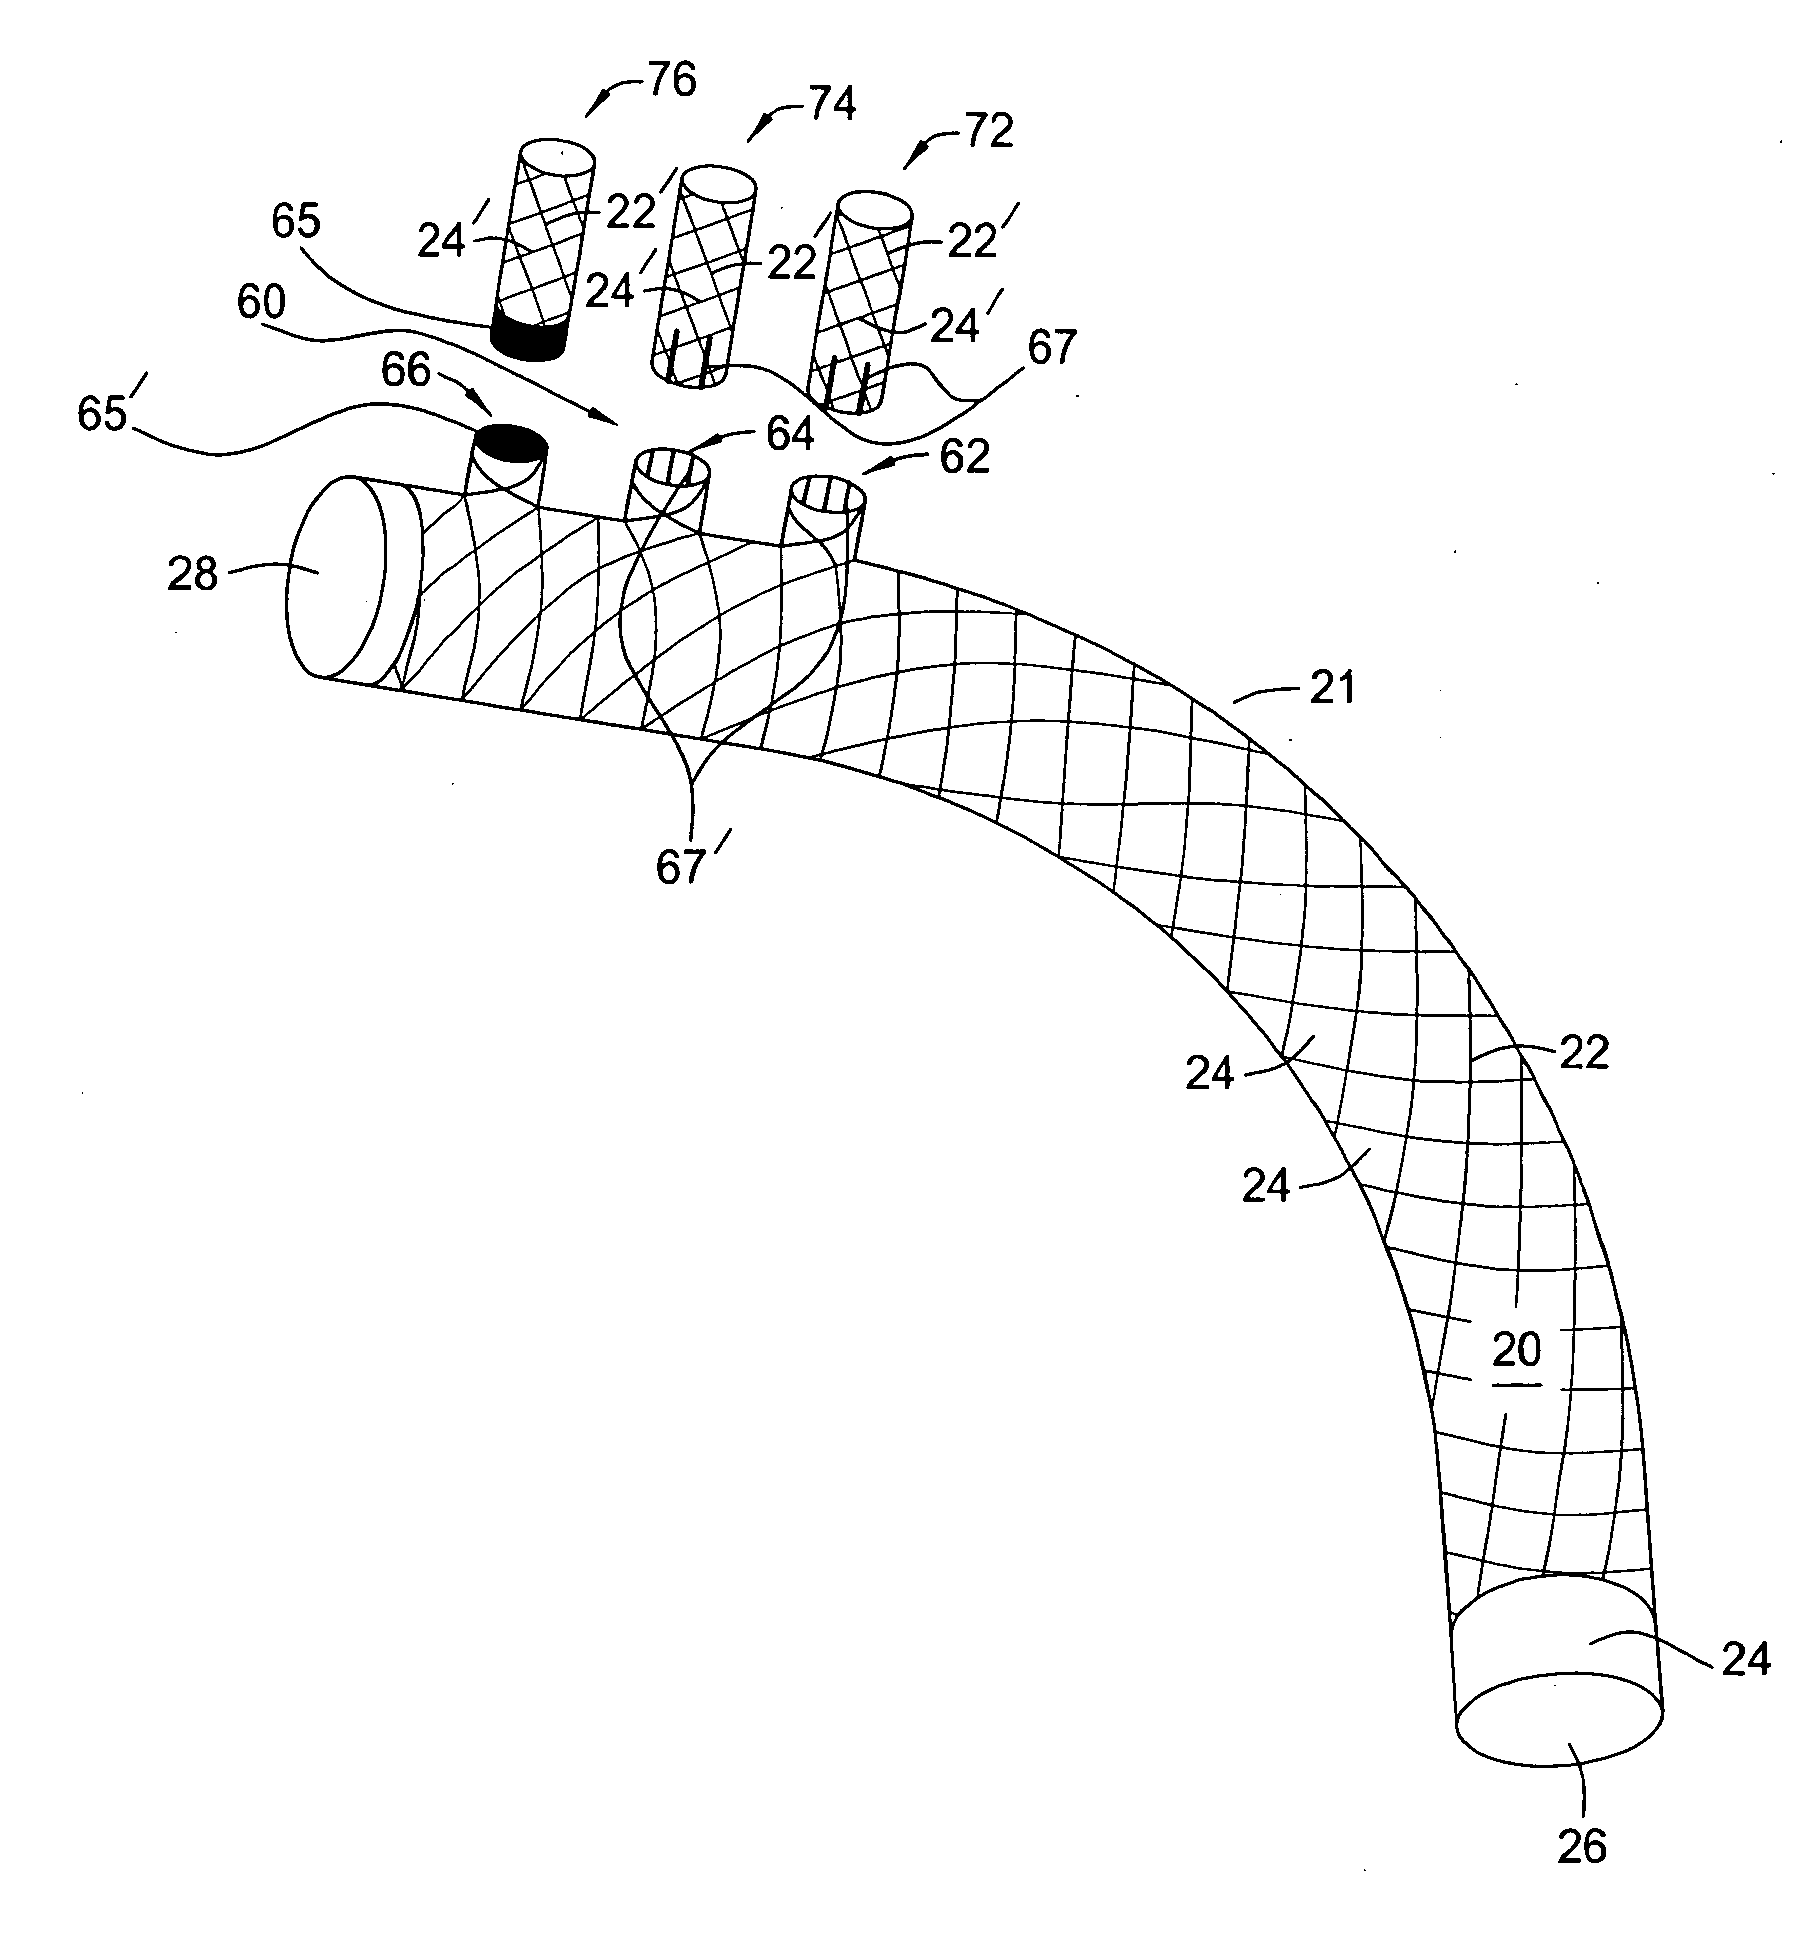 Methods and apparatus for treatment of aneurysms adjacent branch arteries